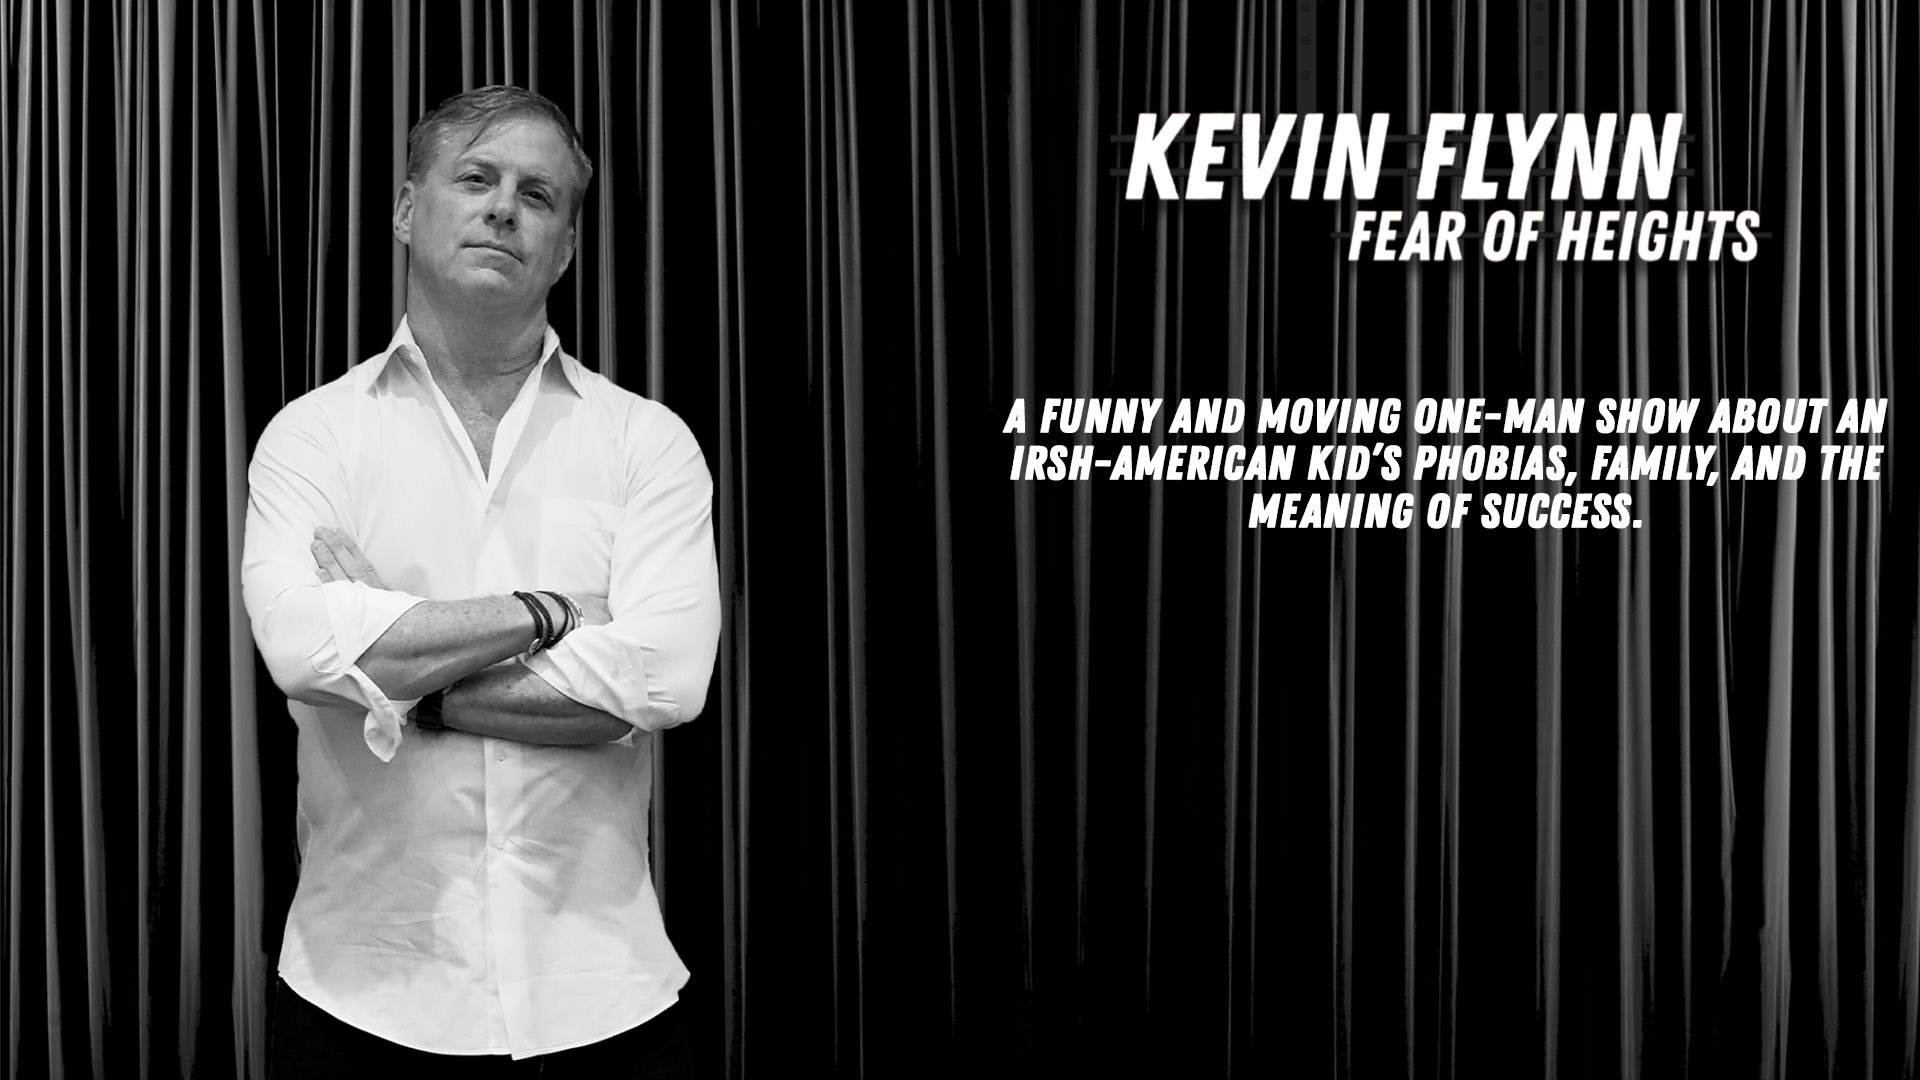 Kevin Flynn Fear of Heights One-man comedy show